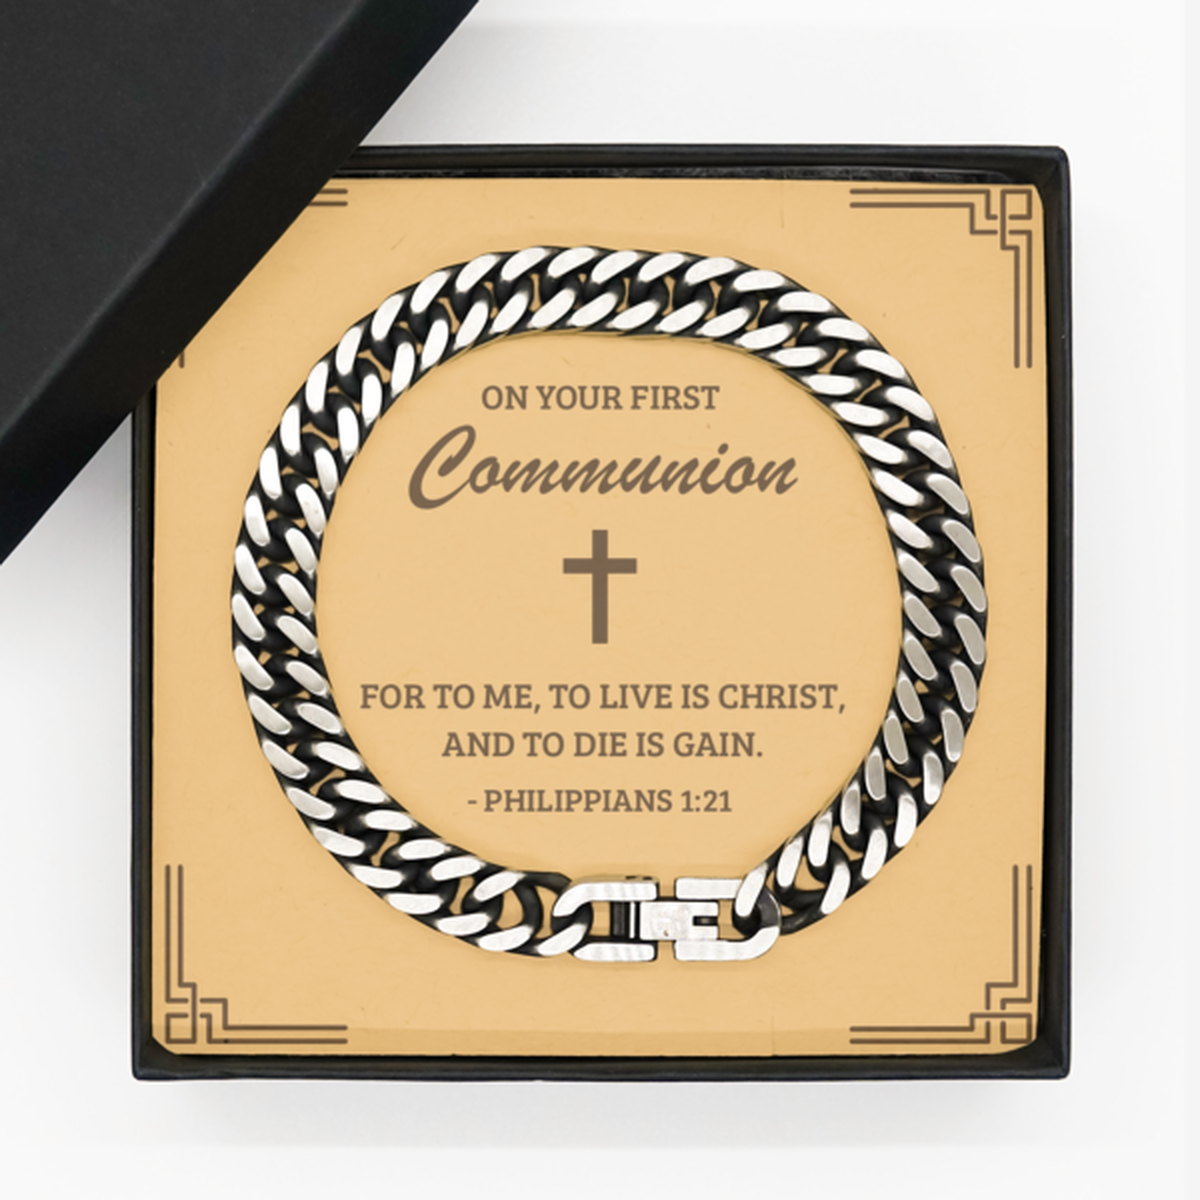 First Communion Gifts for Teenage Boys, To live is Christ, and to die is gain, Cuban Link Chain Bracelet with Bible Verse Message Card, Religious Catholic Bracelet for Son, Grandson, Dad, Godfather